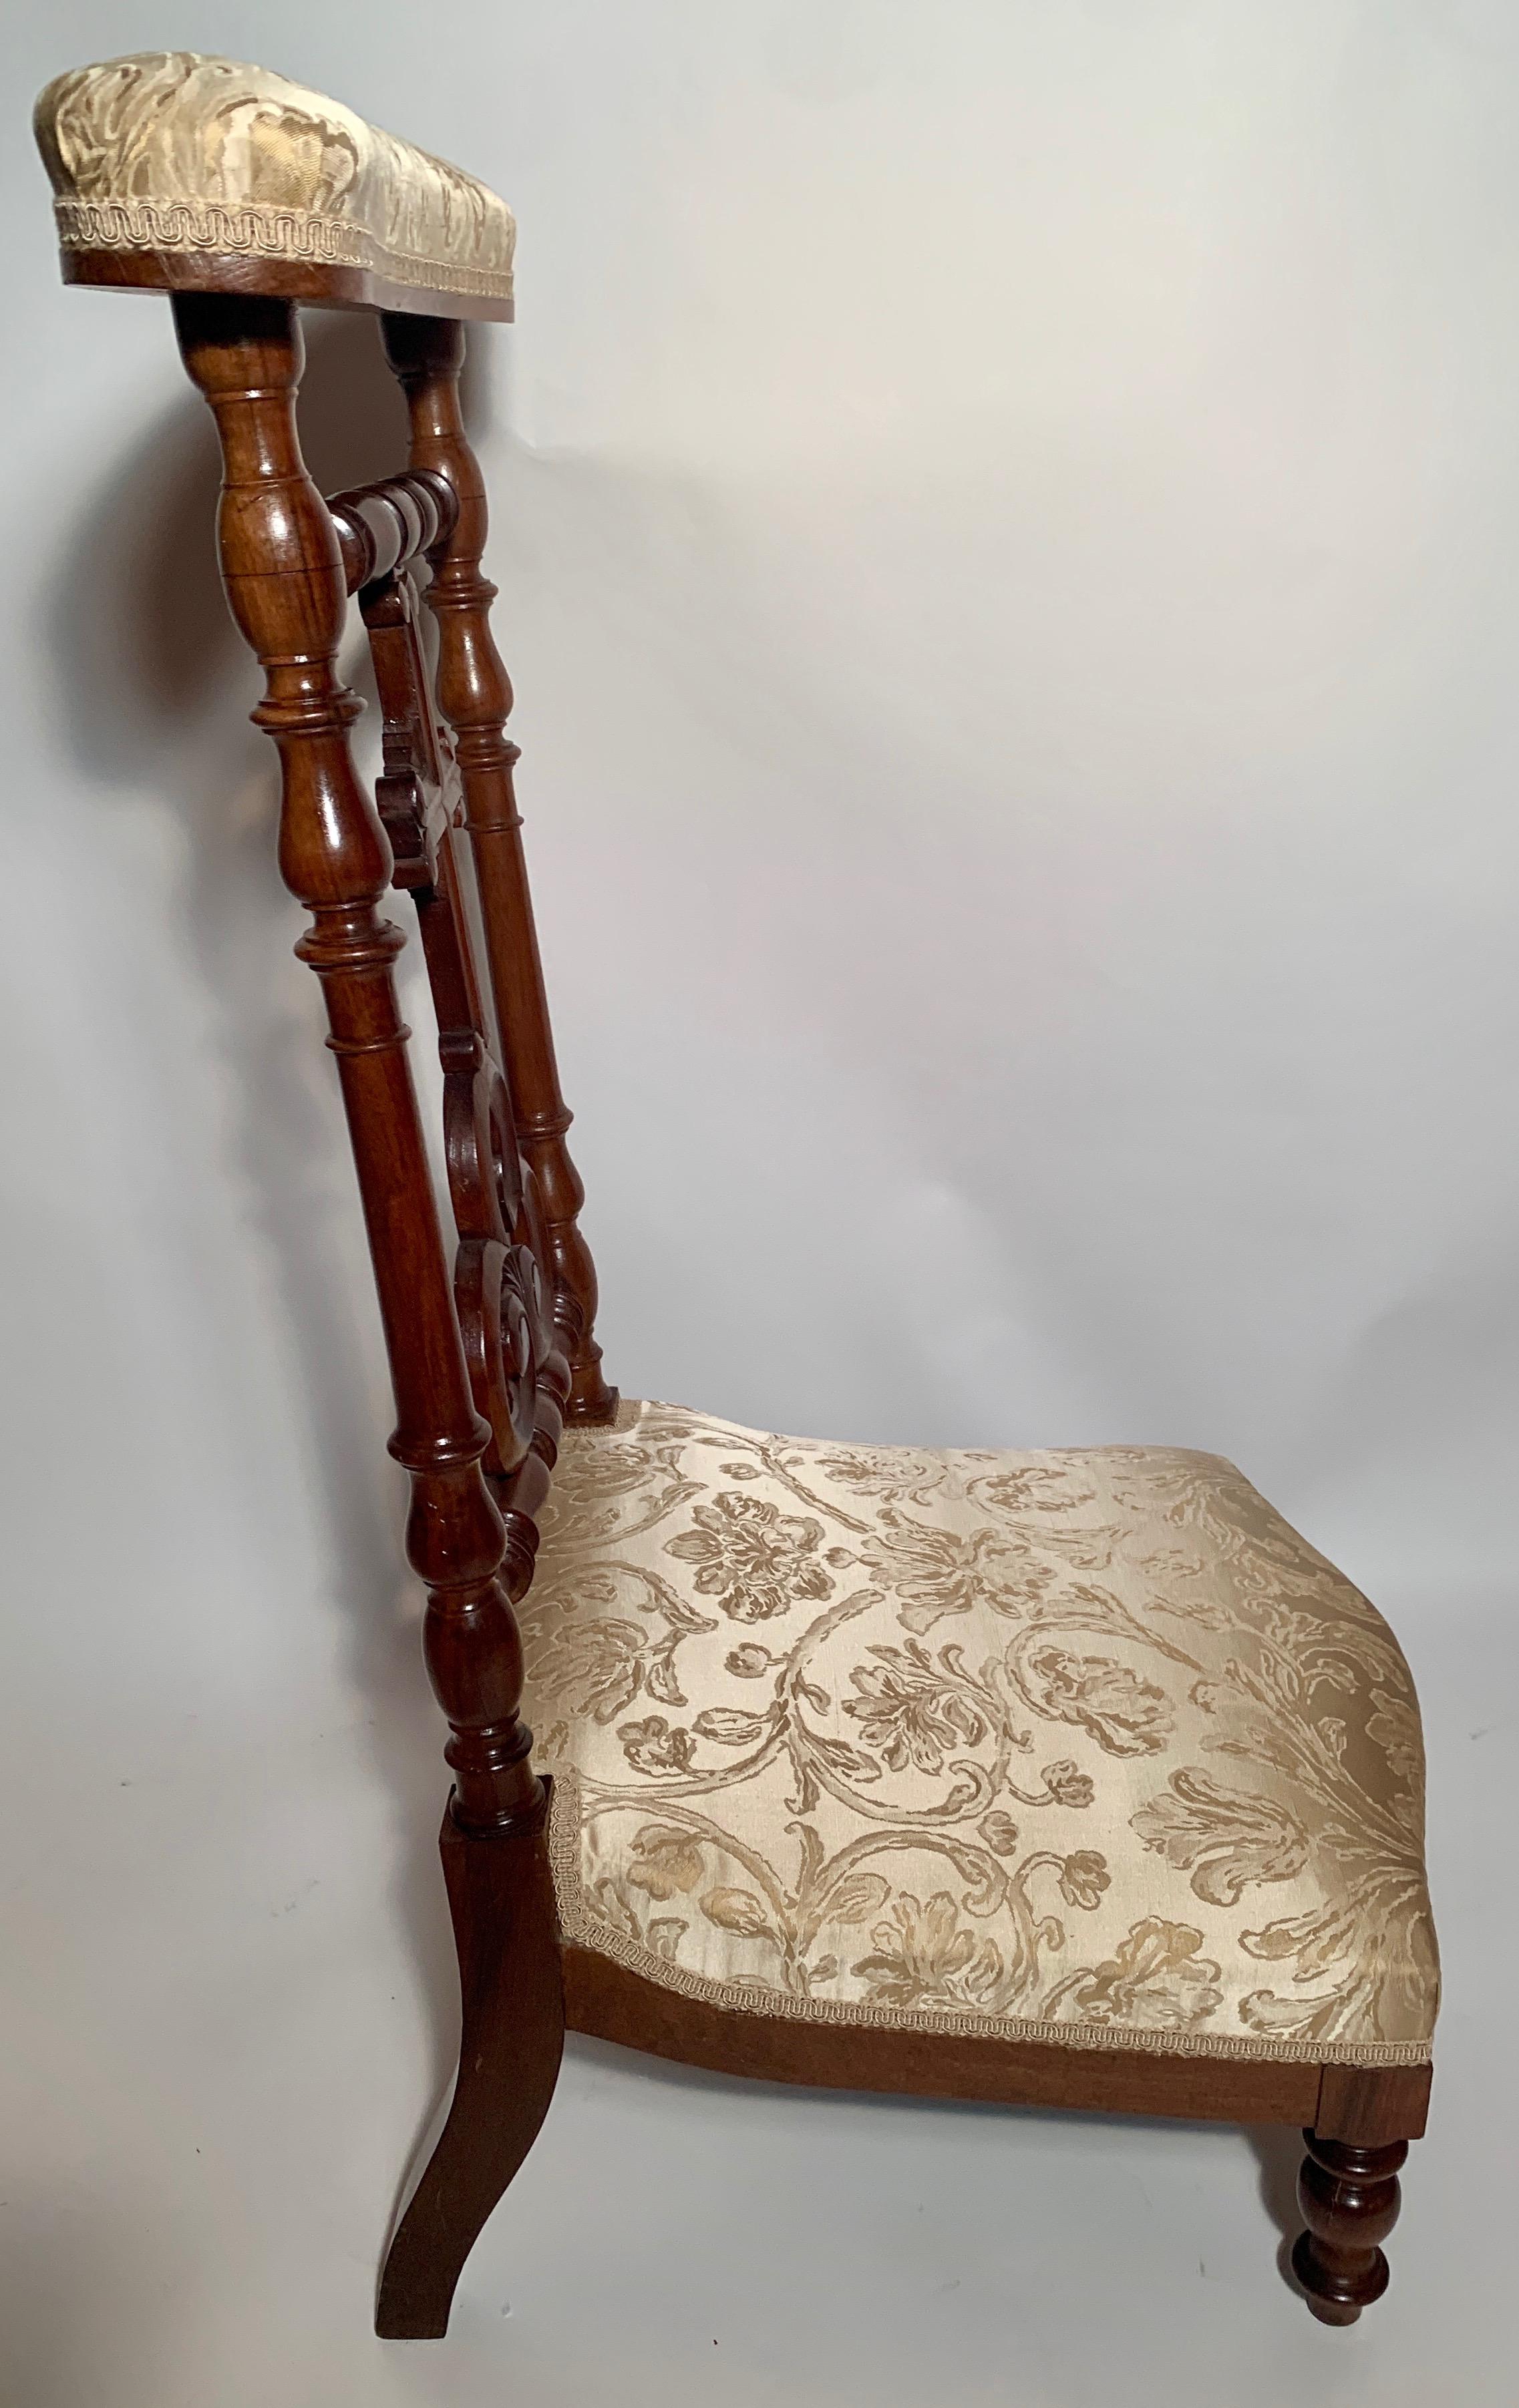 A prie-dieu is a small piece of furniture used in the home for kneeling in prayer. They were often found in bedrooms or front parlors in homes of the period.

 